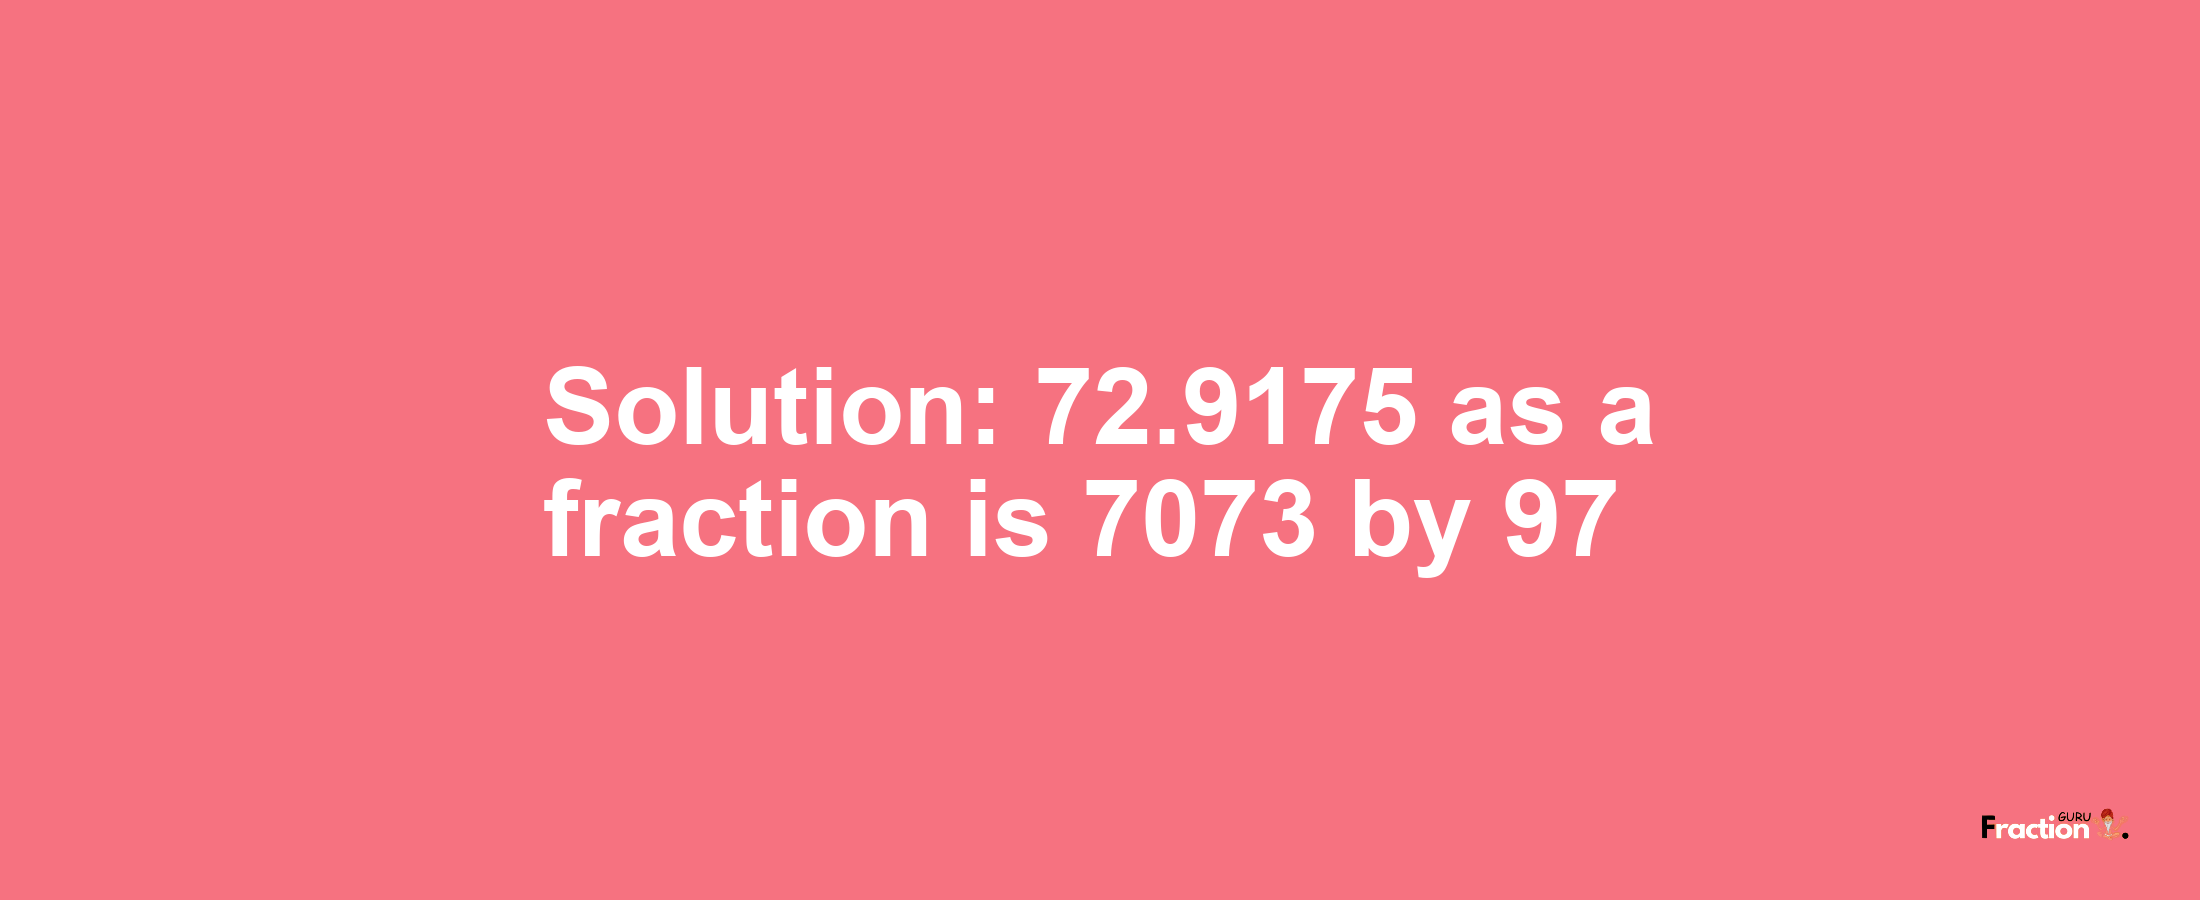 Solution:72.9175 as a fraction is 7073/97